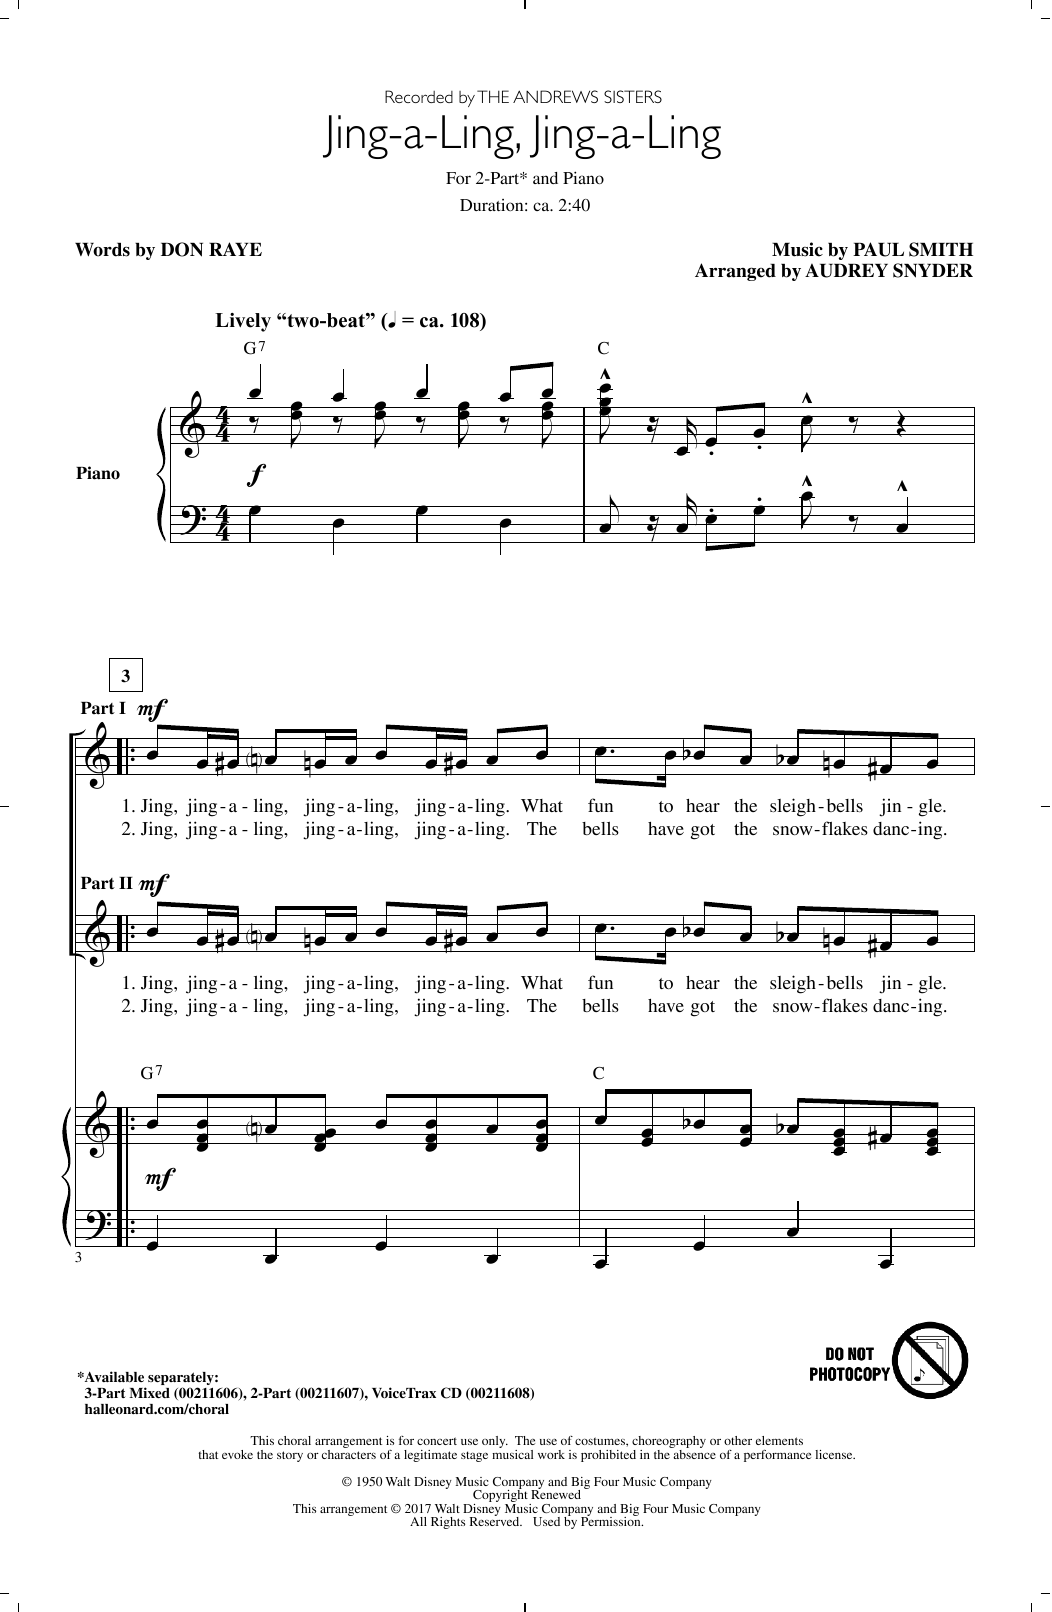 Download Audrey Snyder Jing-A-Ling, Jing-A-Ling Sheet Music